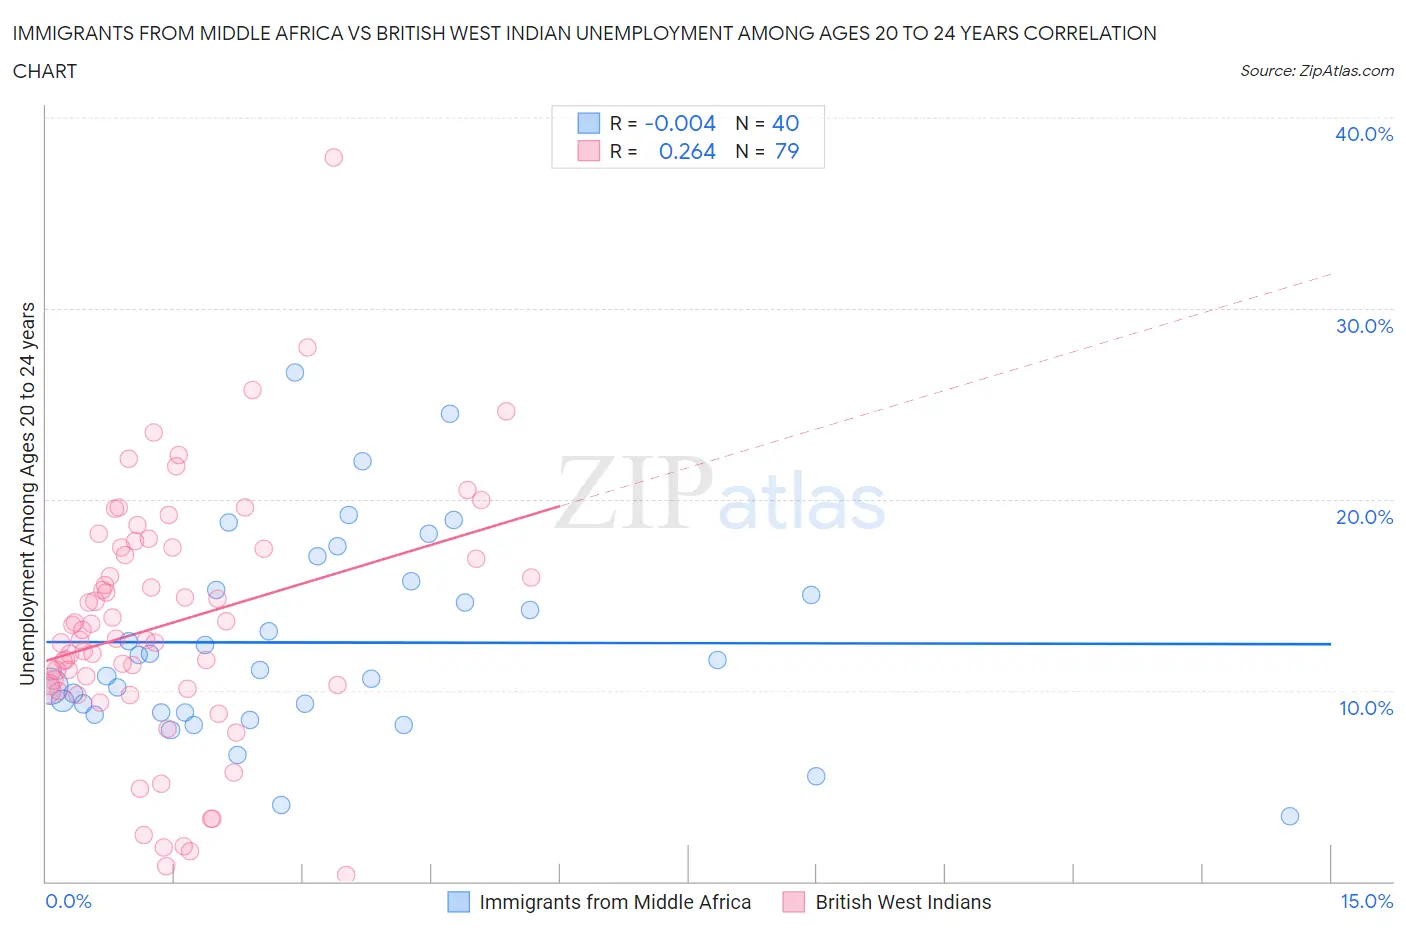 Immigrants from Middle Africa vs British West Indian Unemployment Among Ages 20 to 24 years